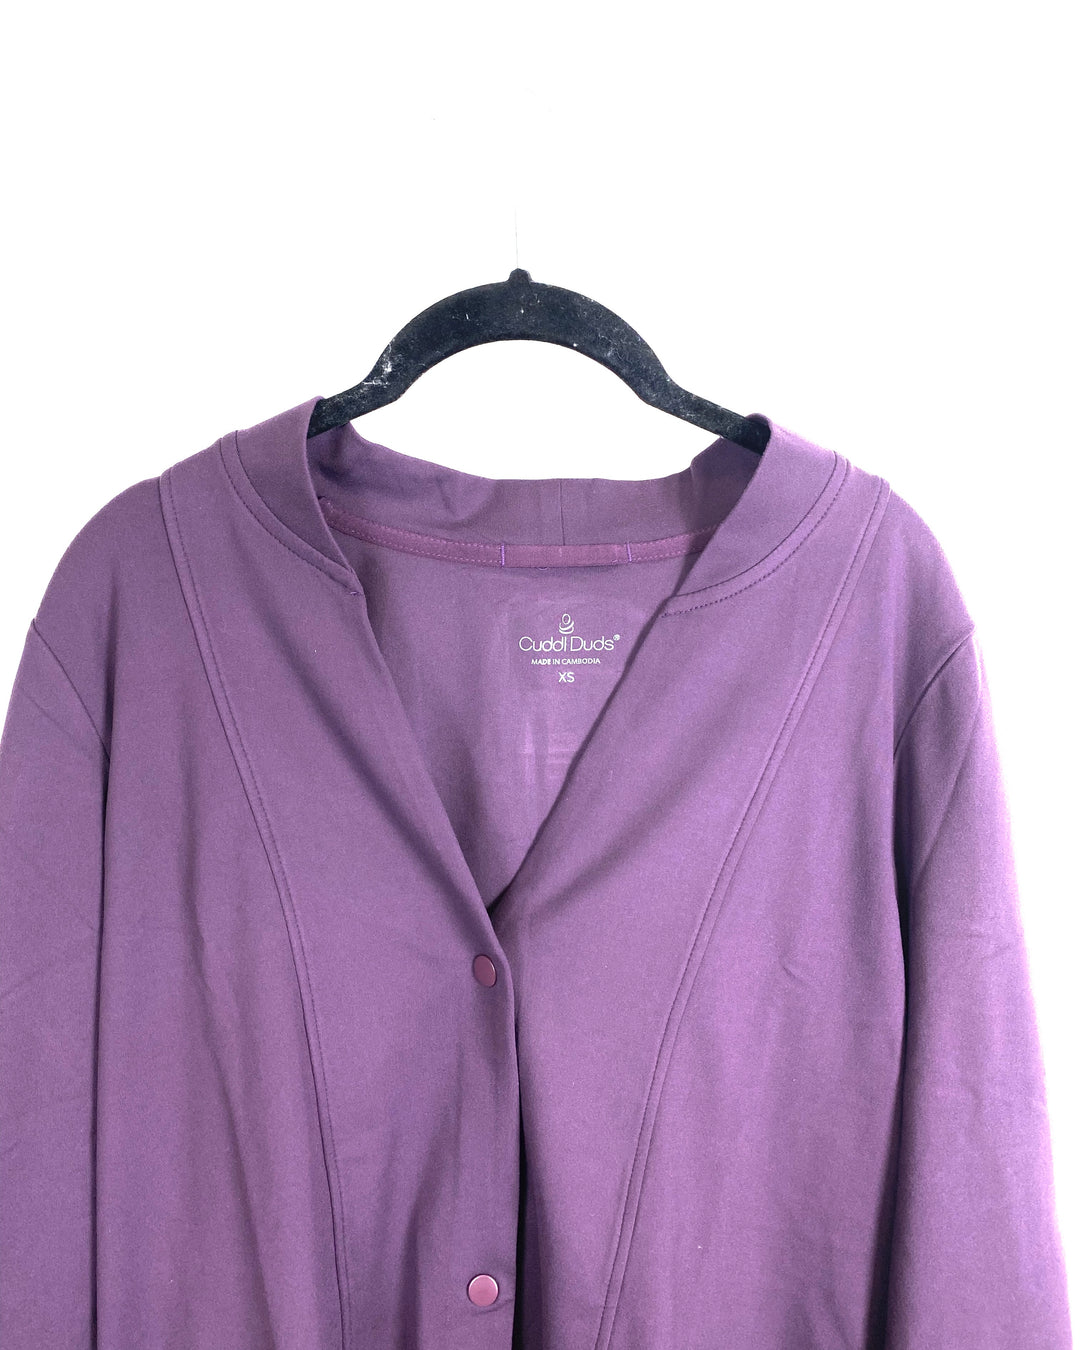 Purple Button Up Cardigan - Size 0/2, 6/8 and 10/12